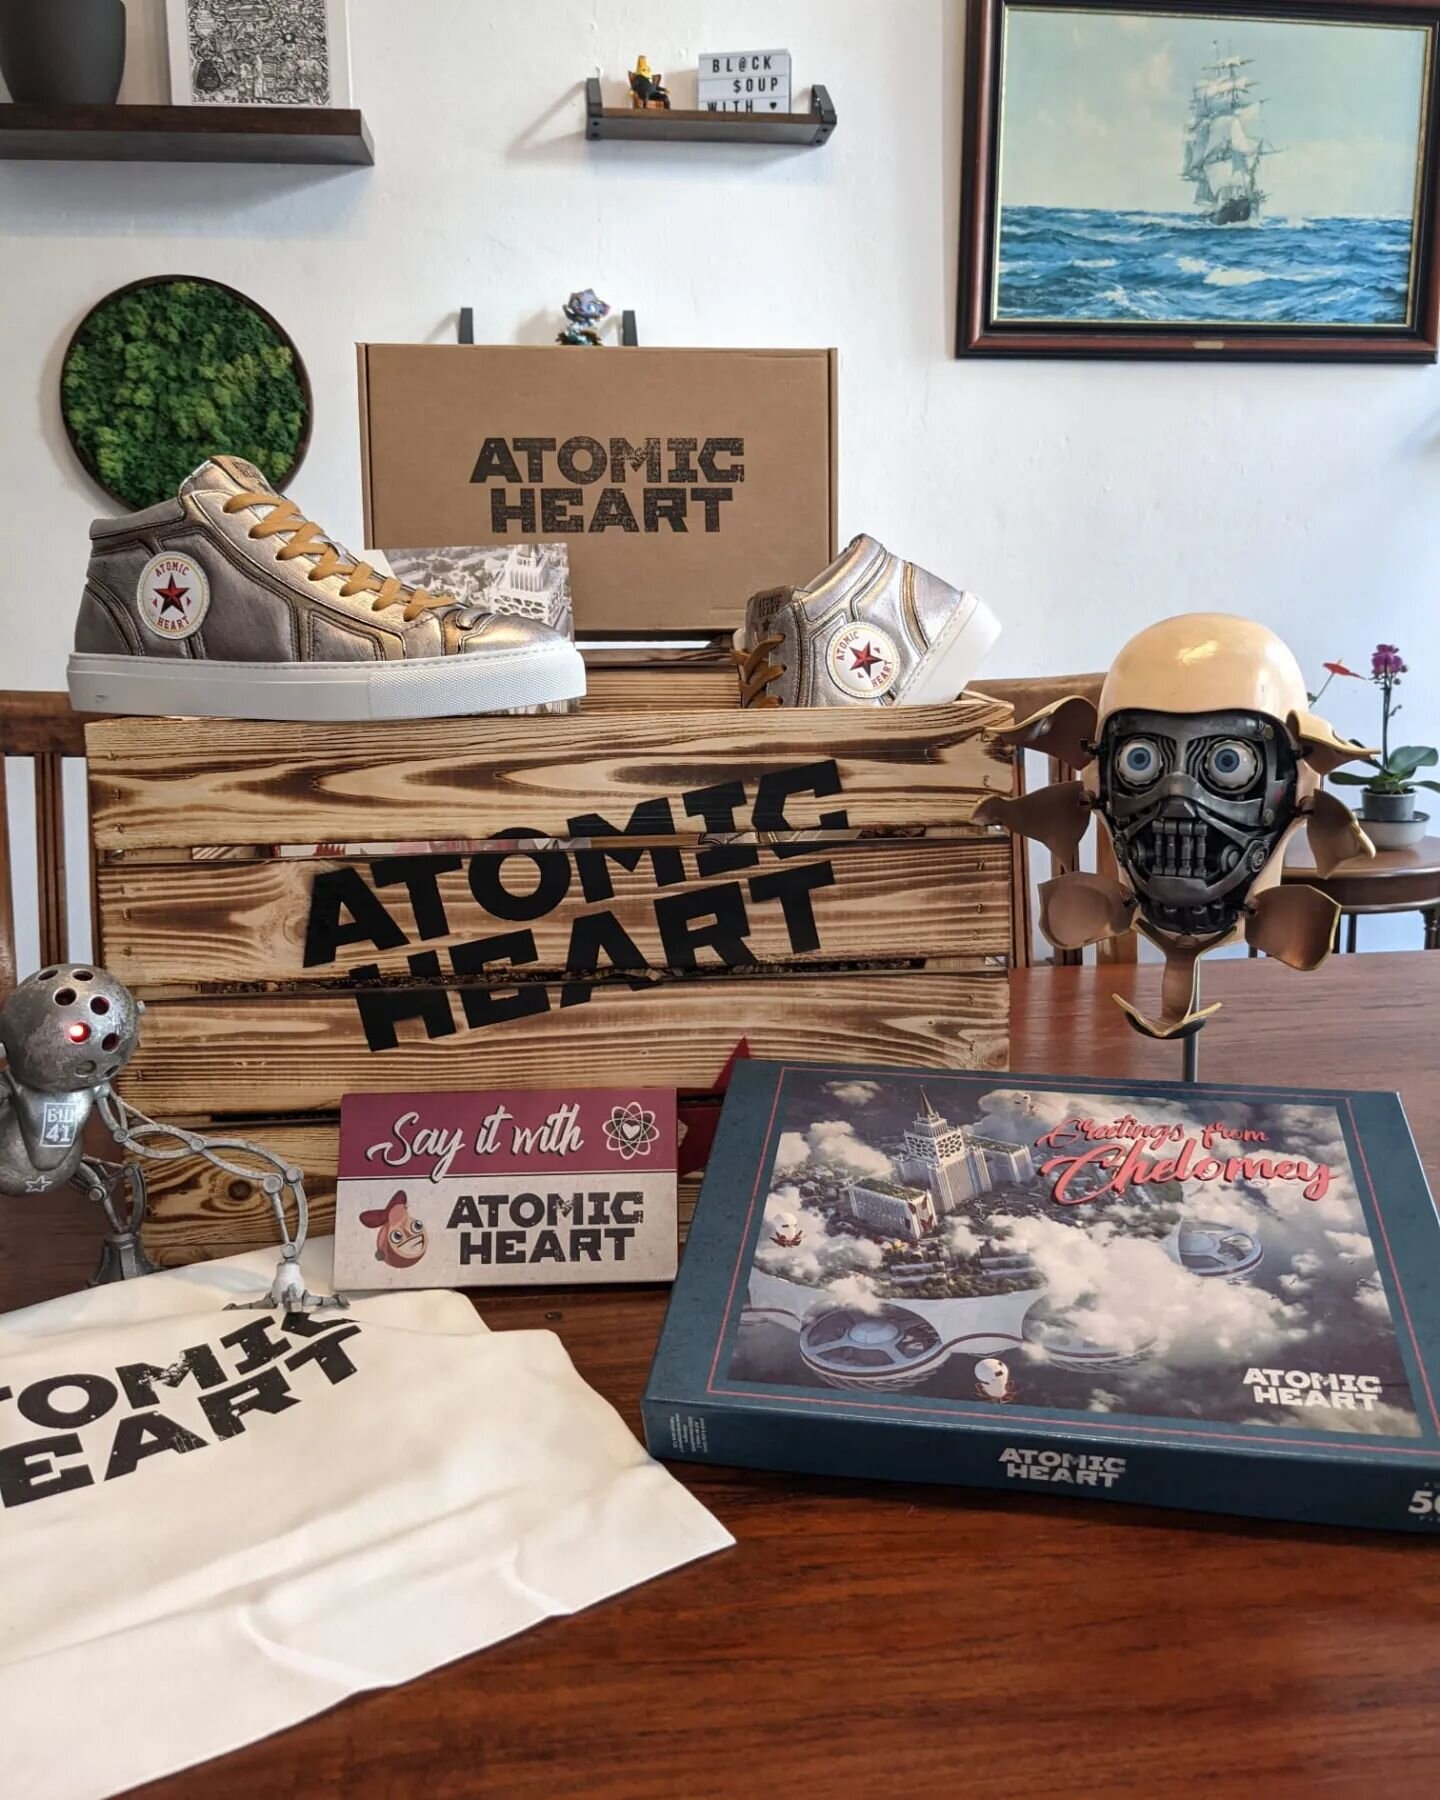 The release of #AtomicHeart is right around the corner, and the buzz kit is IN-SANE! Thanks a ton @focus_entmt 🔥 Watch us being fabulous walking in those shoes 💃🕺